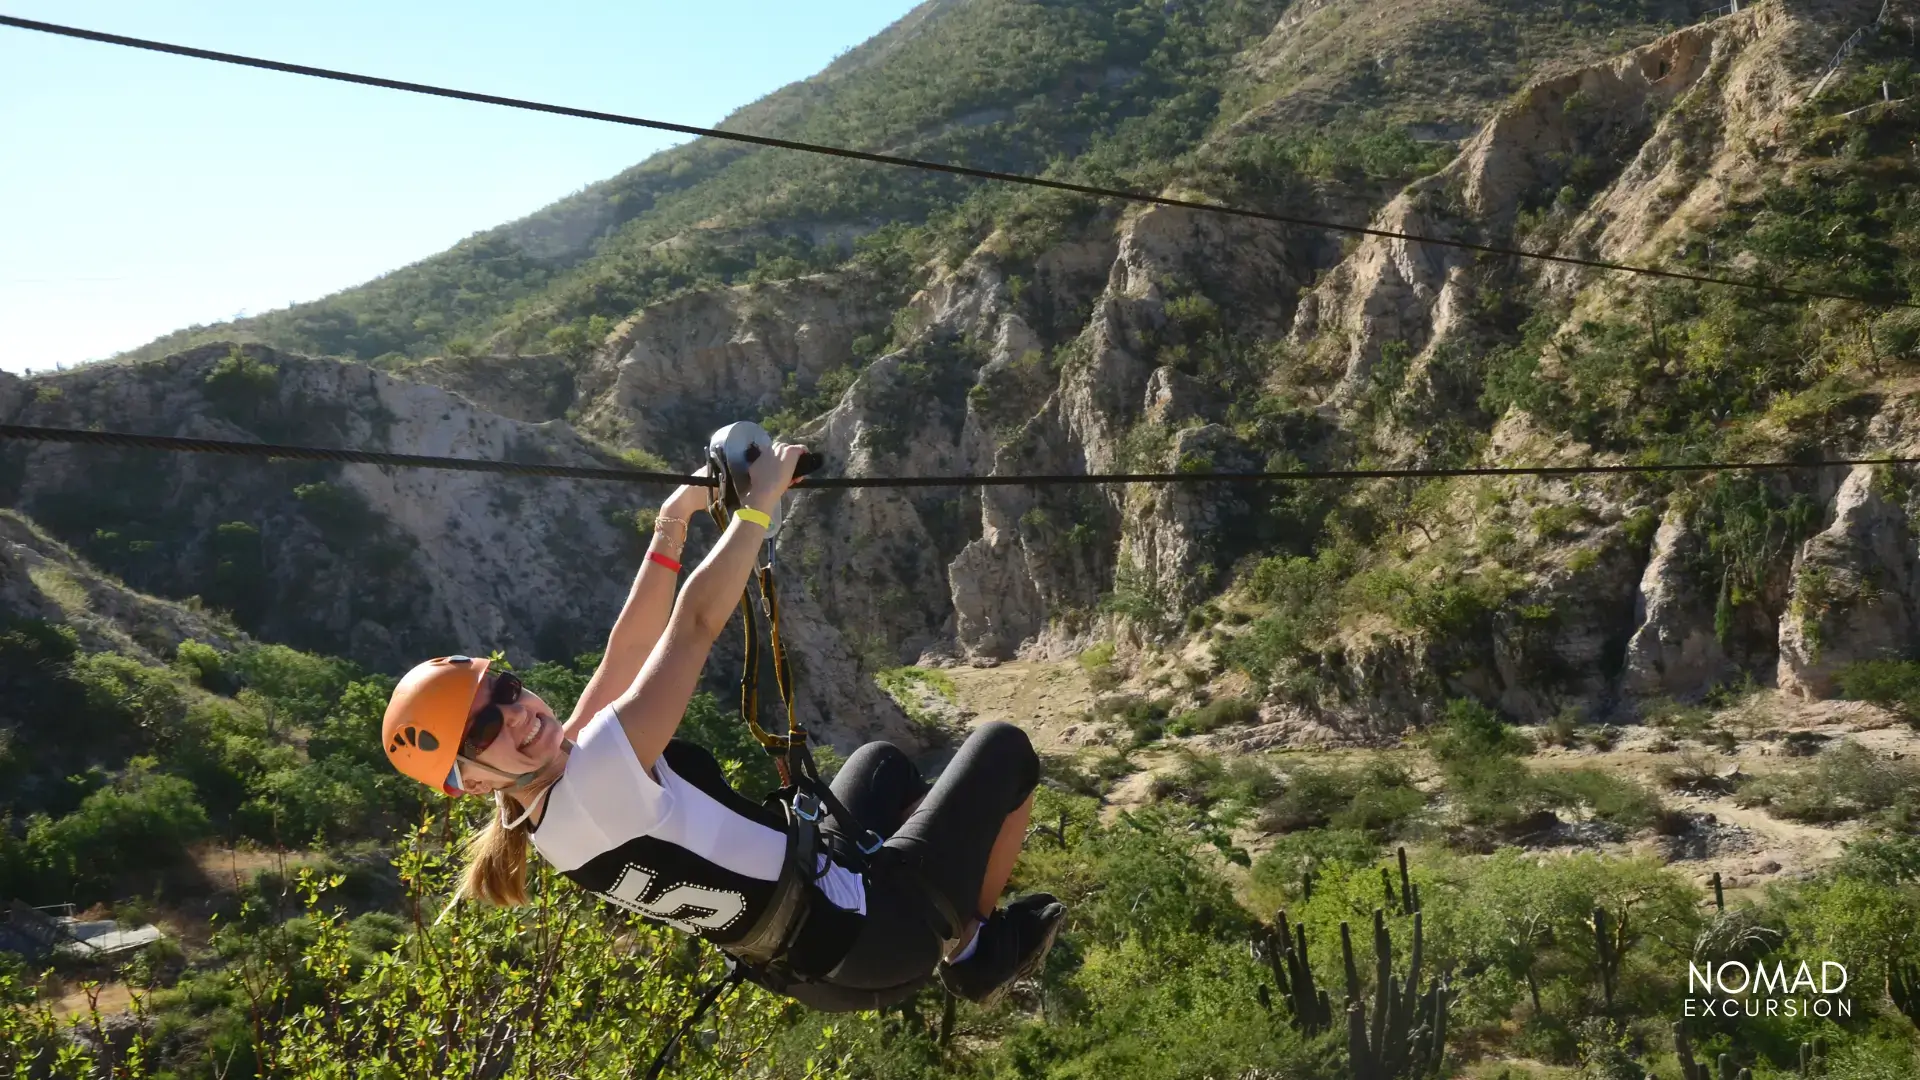 Zip-Lining: Soar Above the Scenic Valley